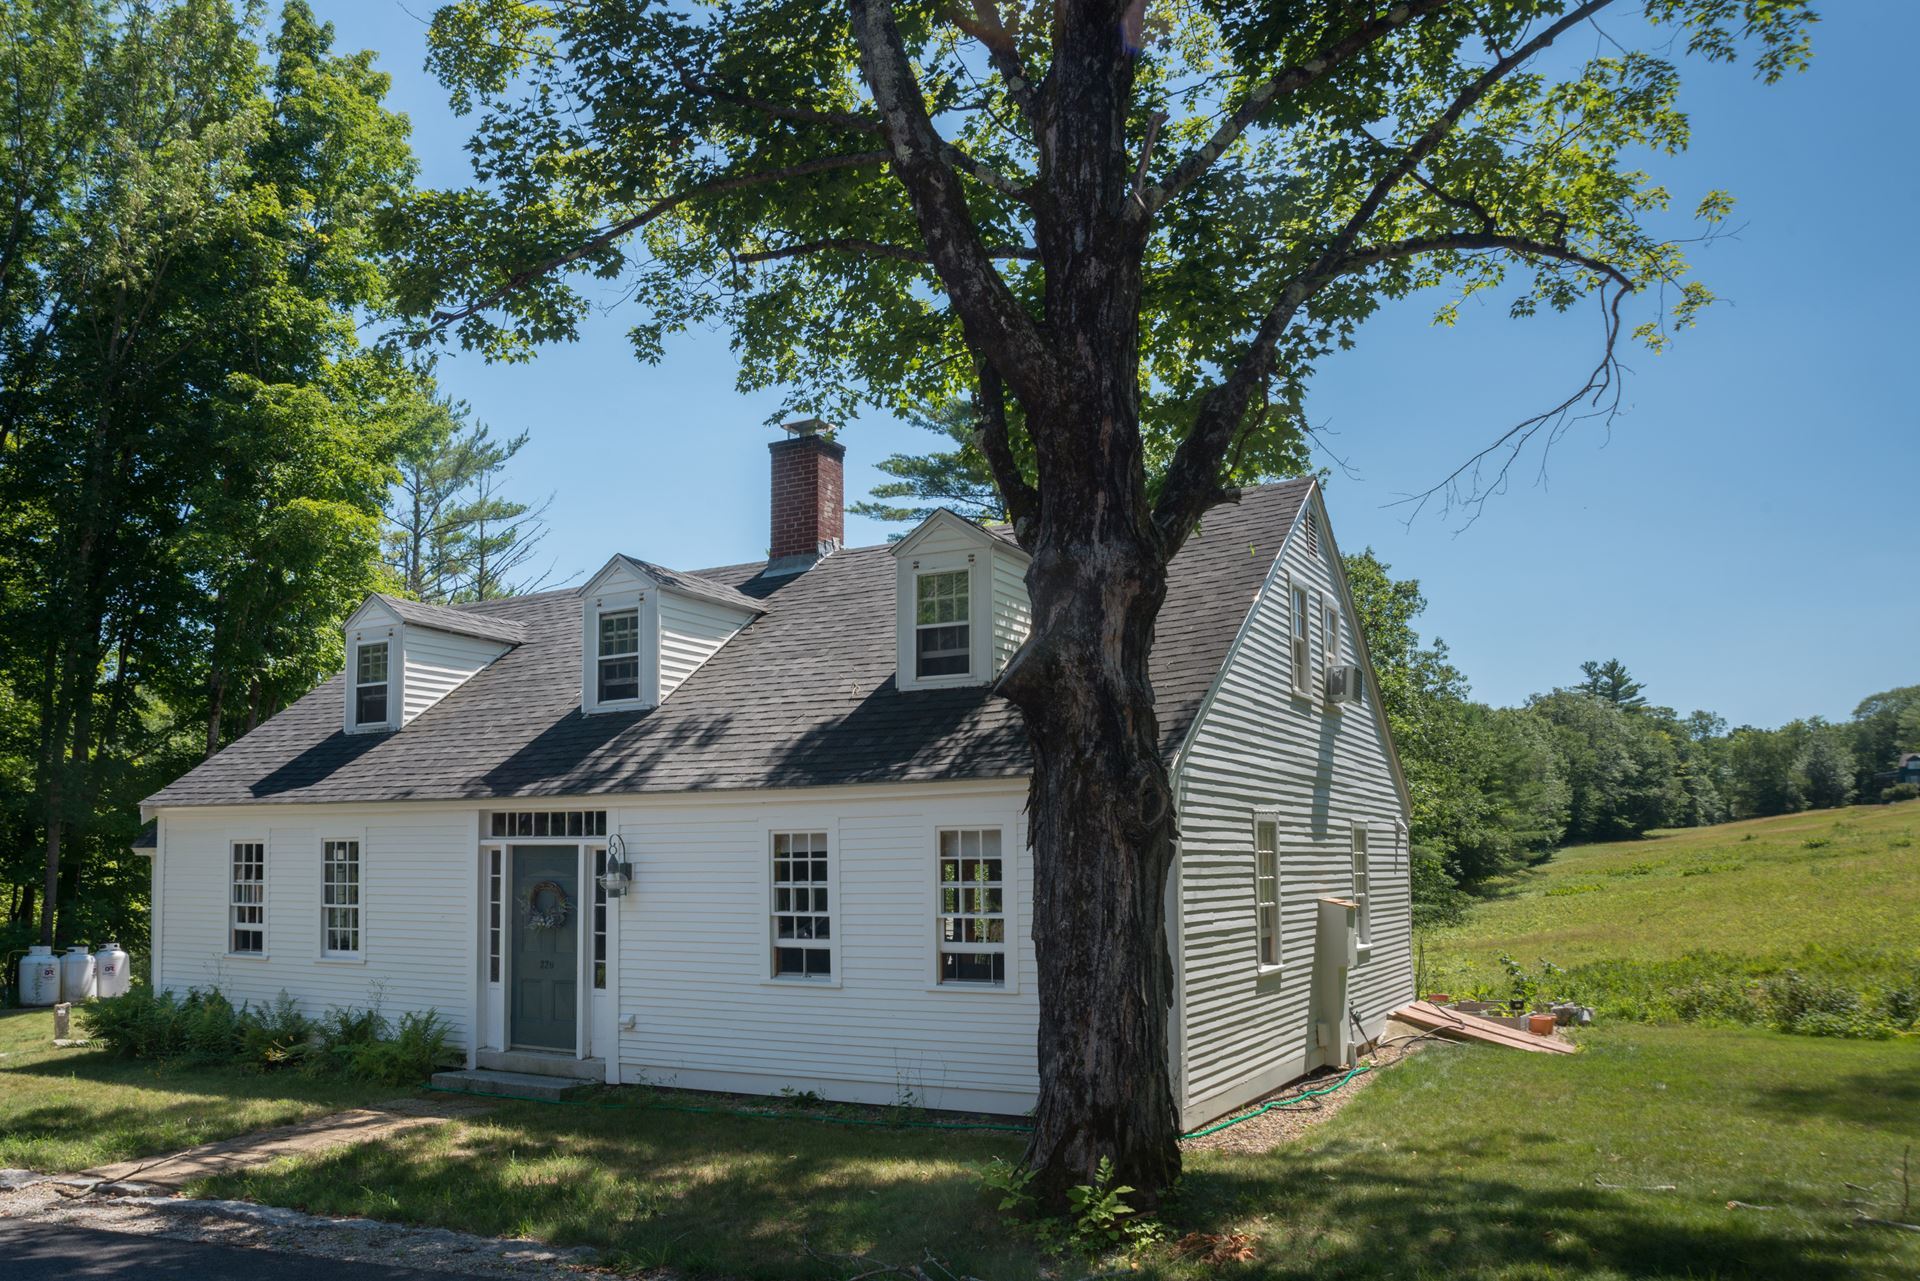 An historic house in New Hampshire, built by the family of astronaut Alan Shepard